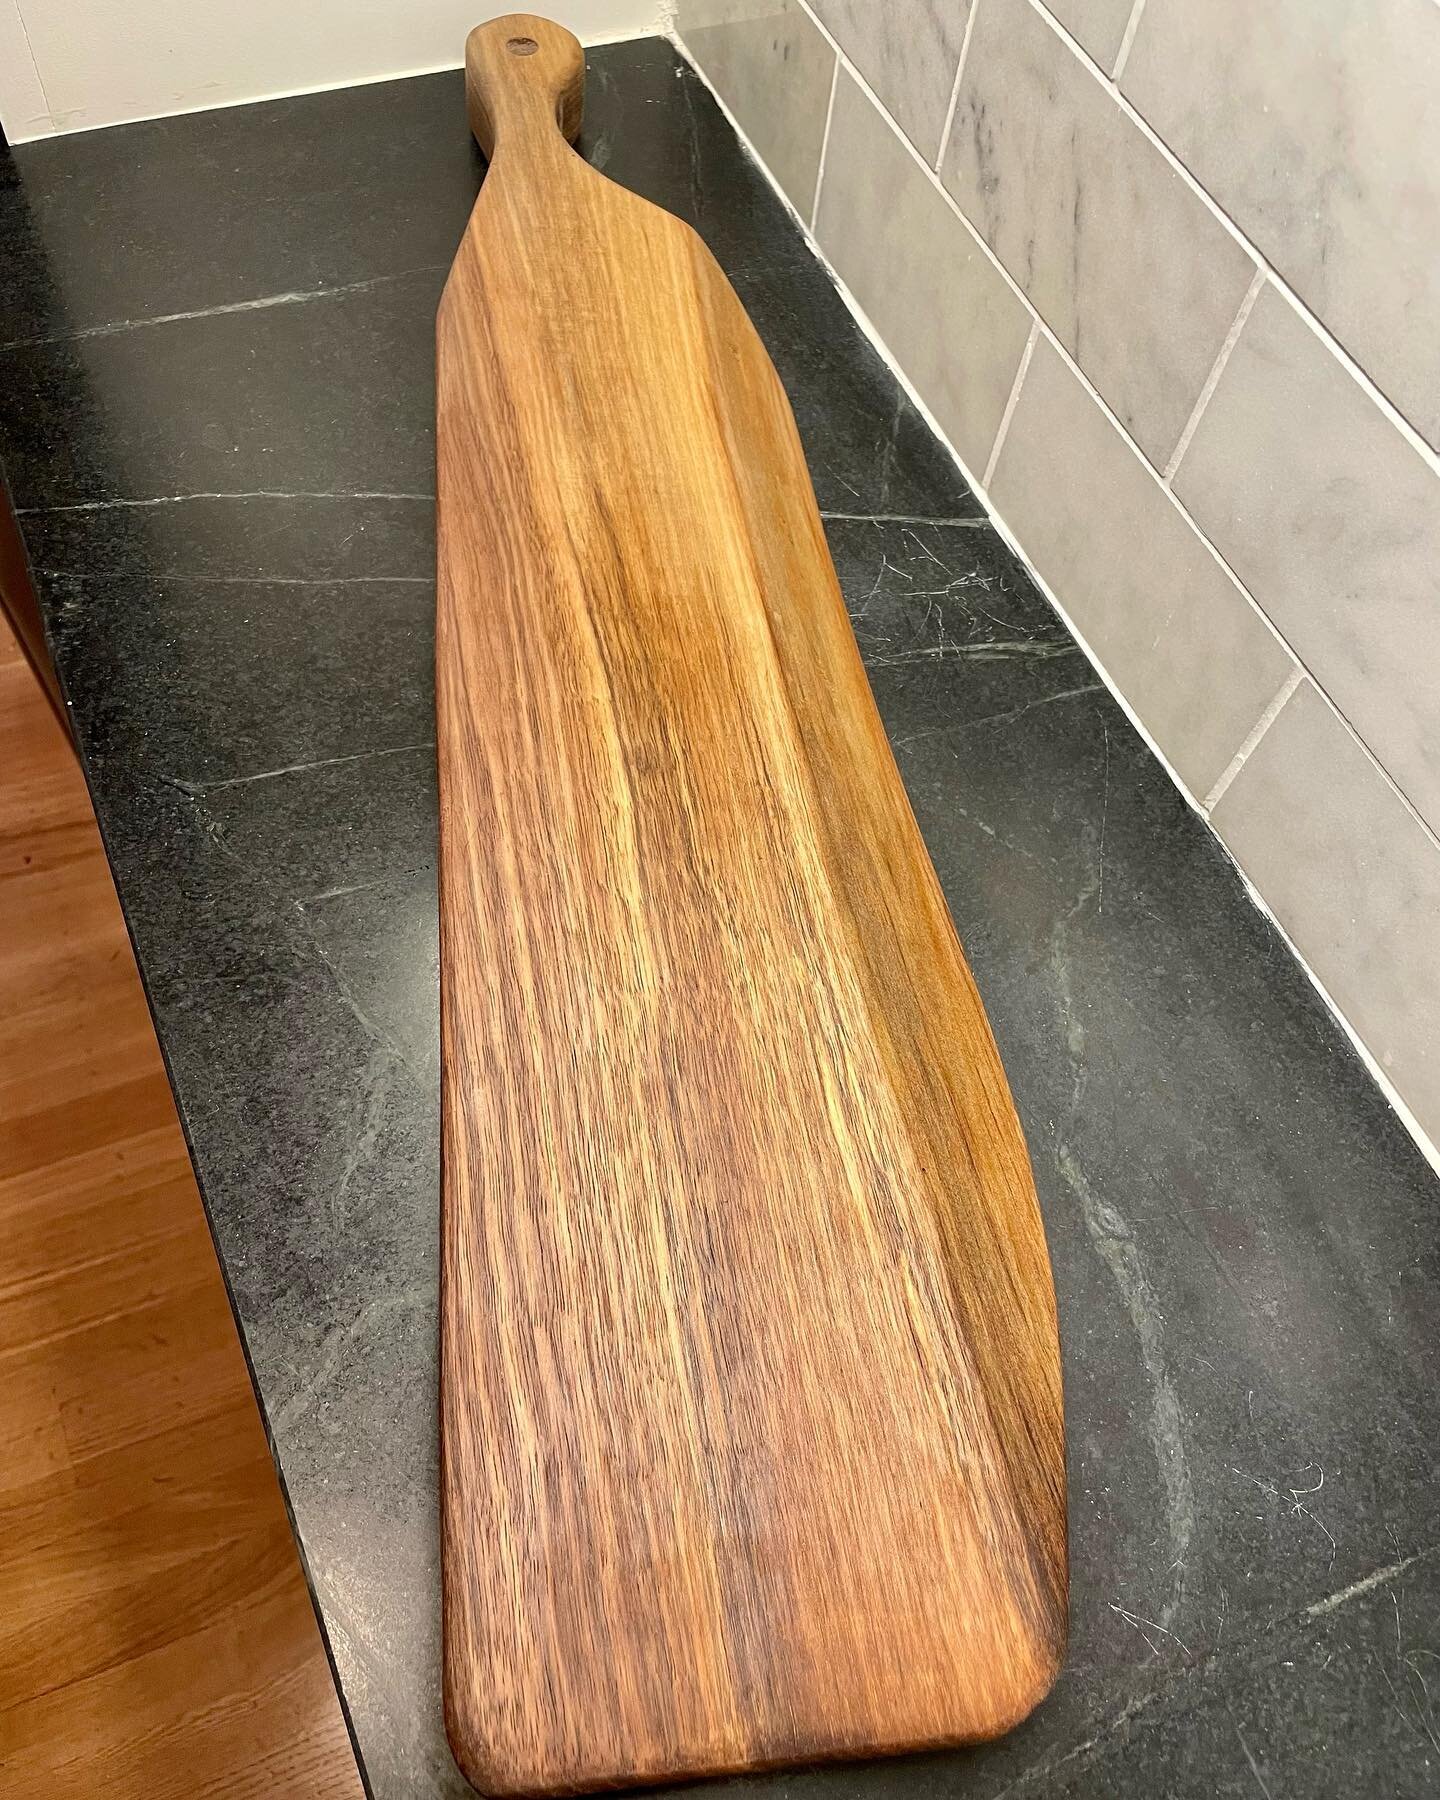 With music and with wood, raw material can be developed into something&hellip;beautiful. Live edge walnut bread board with local walnut sourced from Canadice, NY.